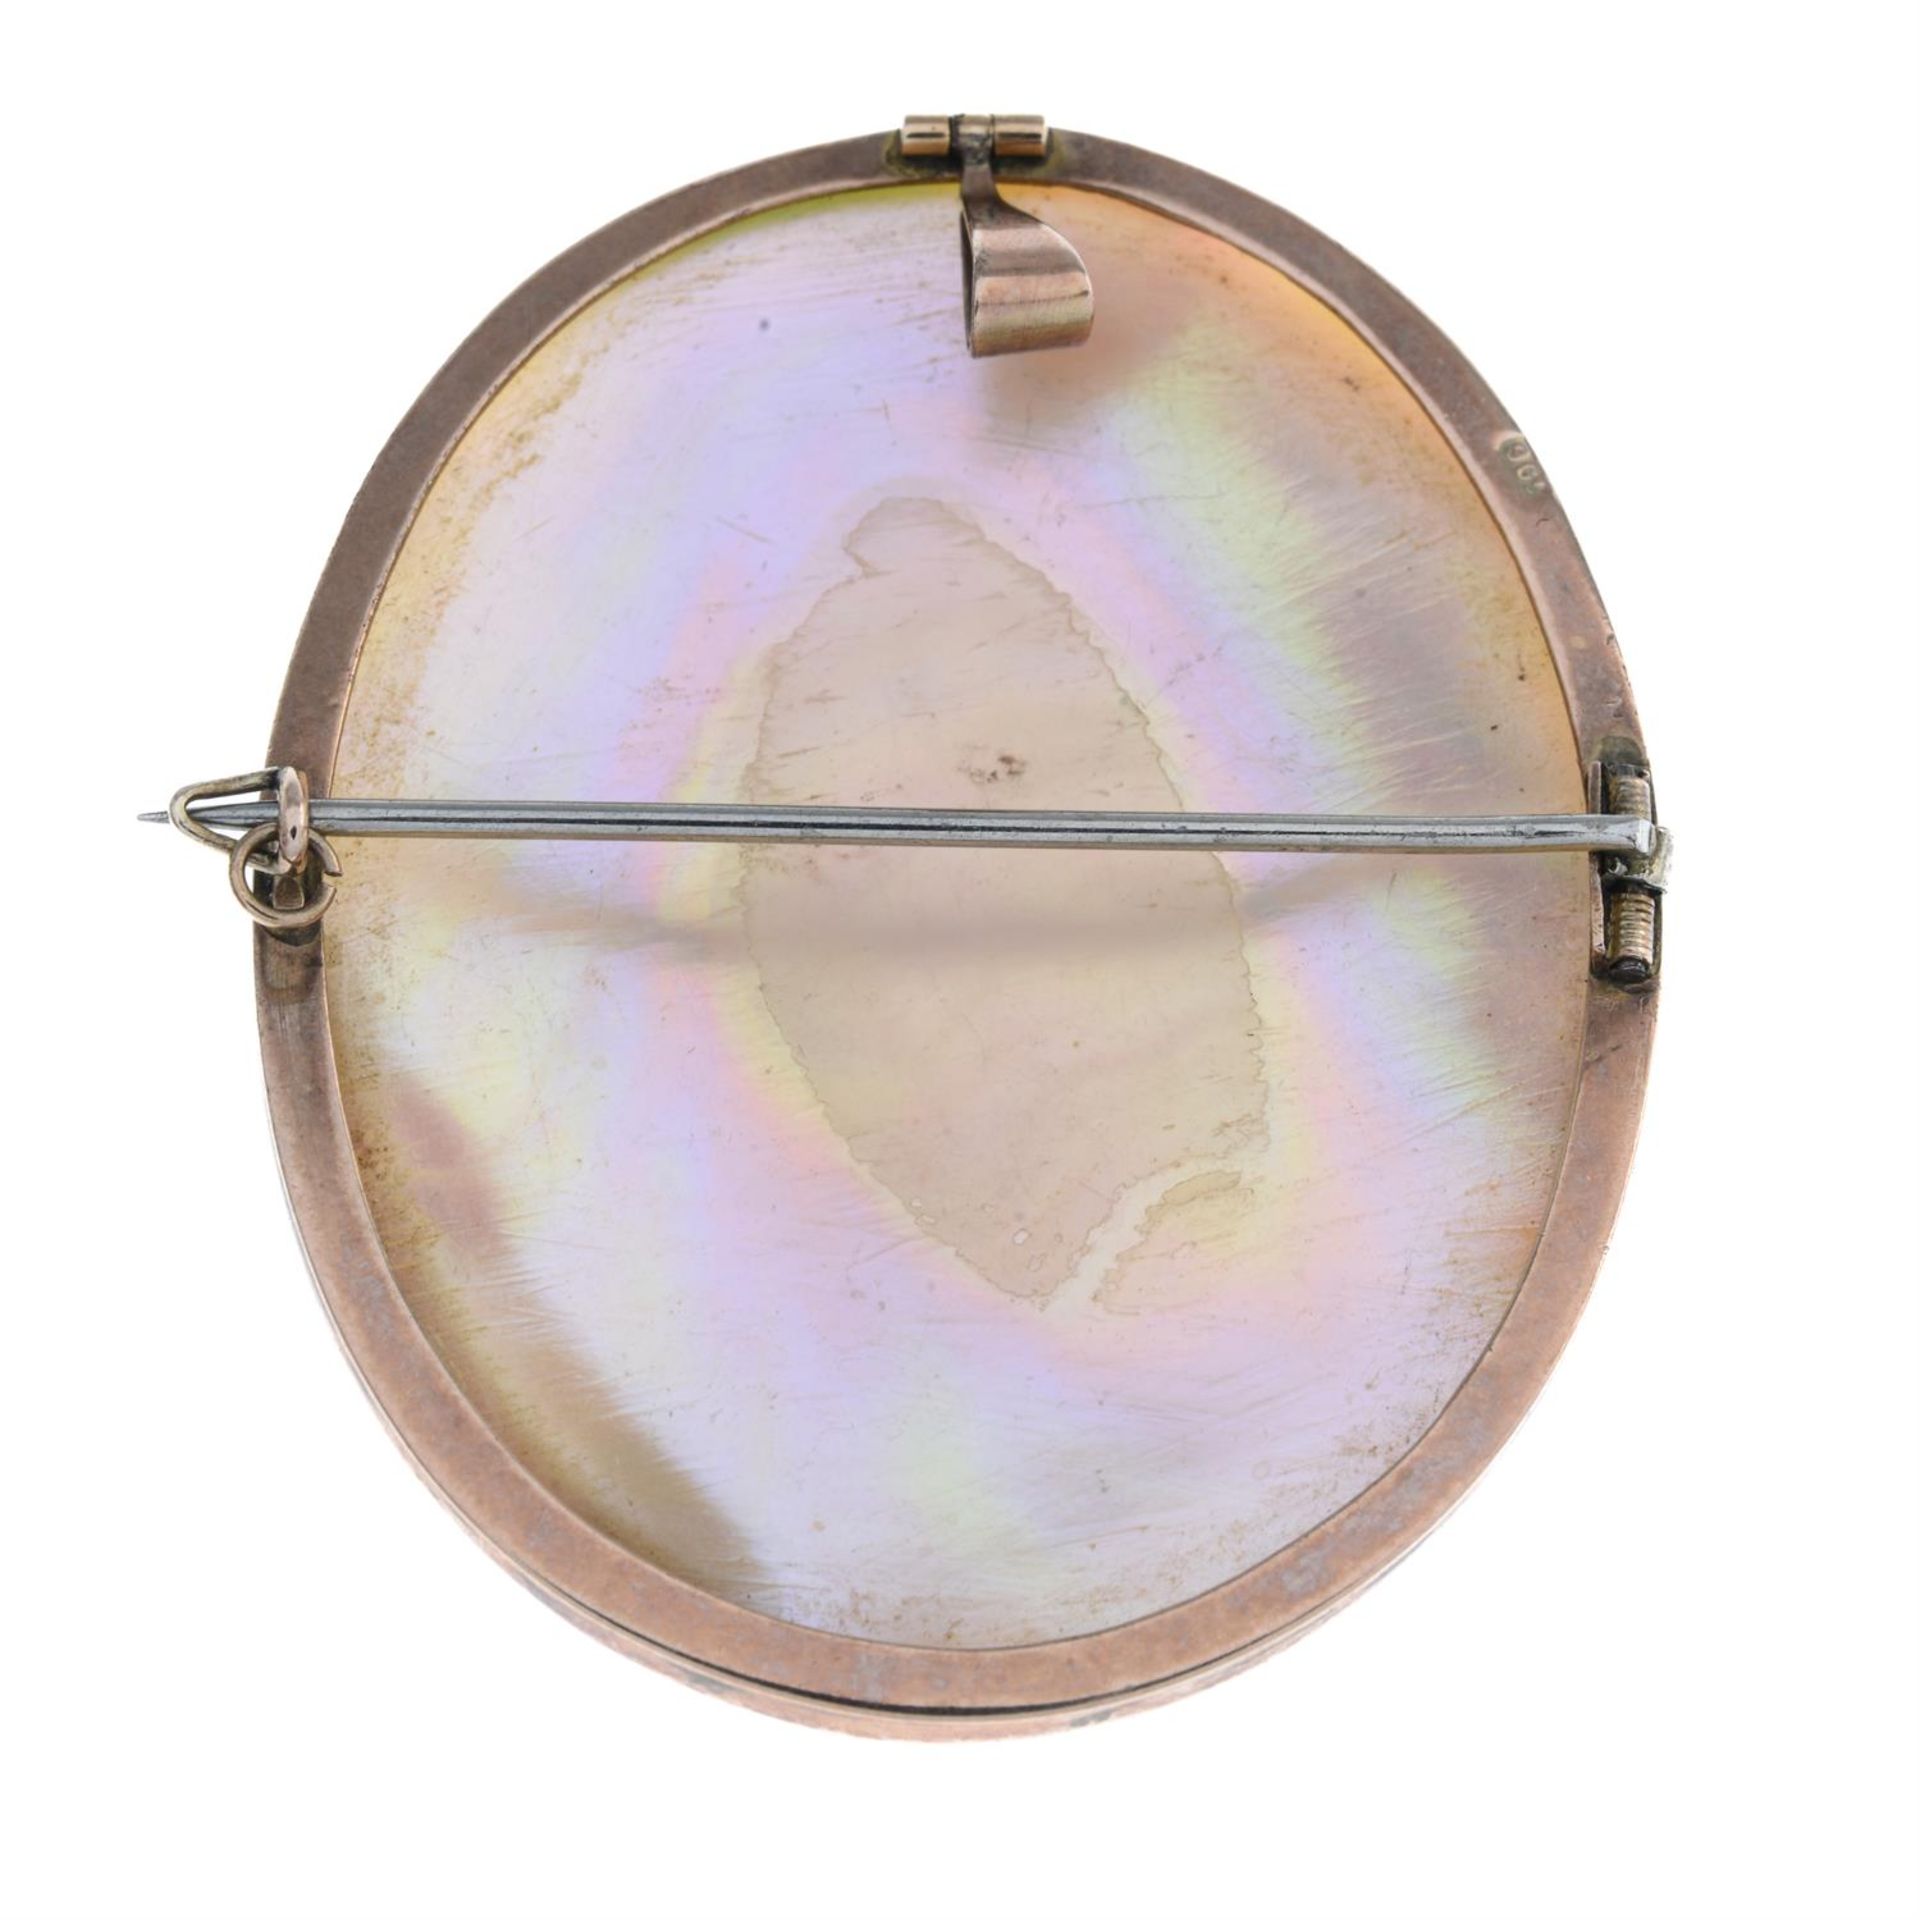 Early 20th century mother-of-pearl pendant/brooch - Image 2 of 2